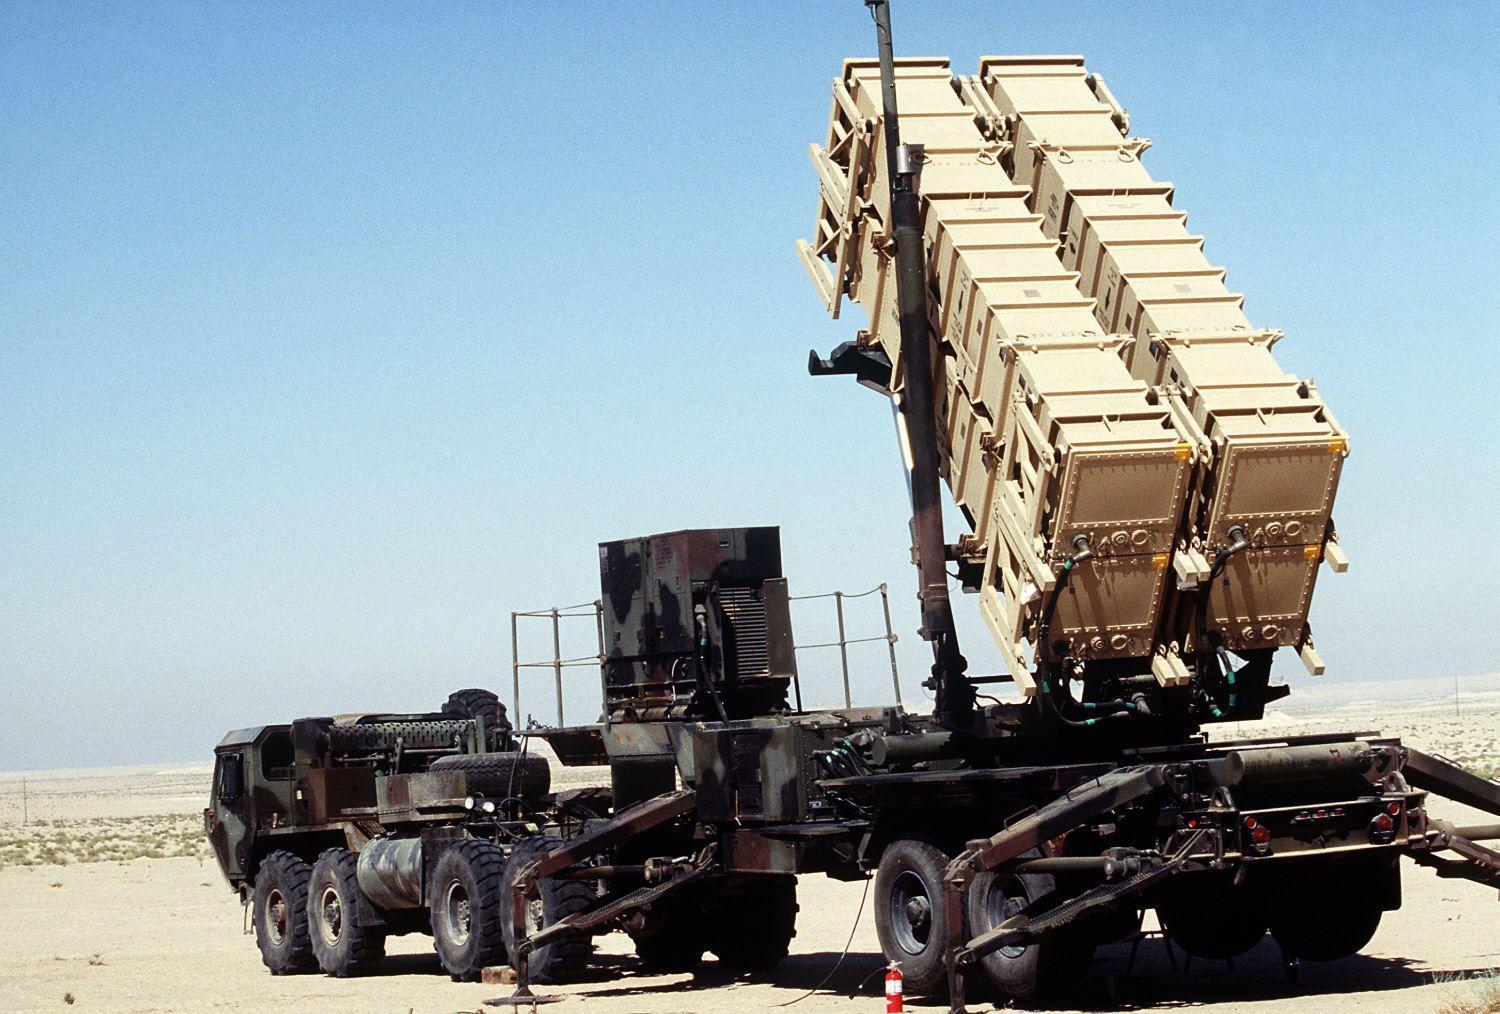 Missile launchers wallpaper picture download:3